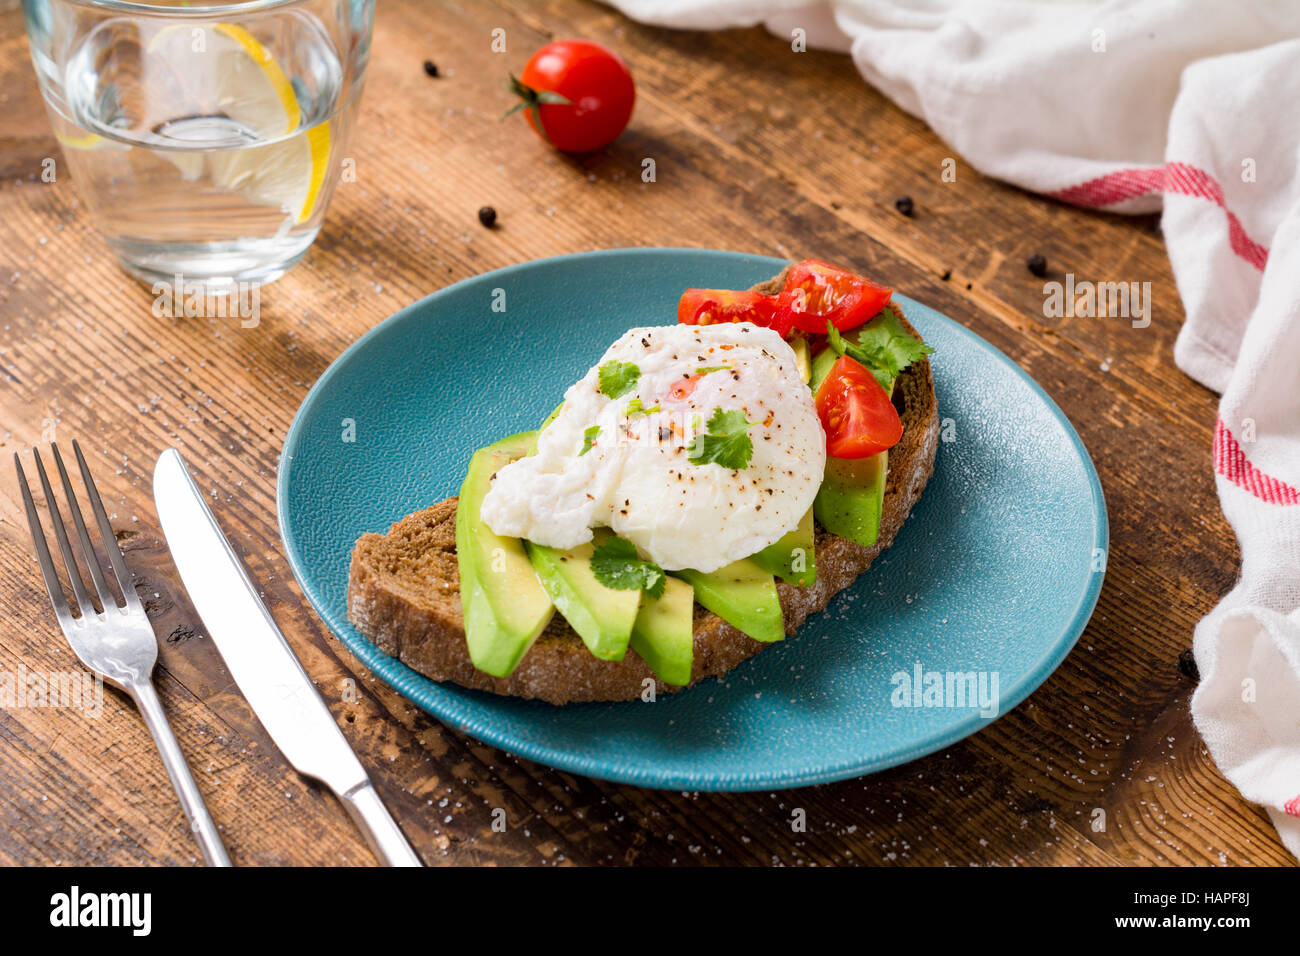 Poached egg and avocado on toast. Healthy breakfast or lunch Stock Photo